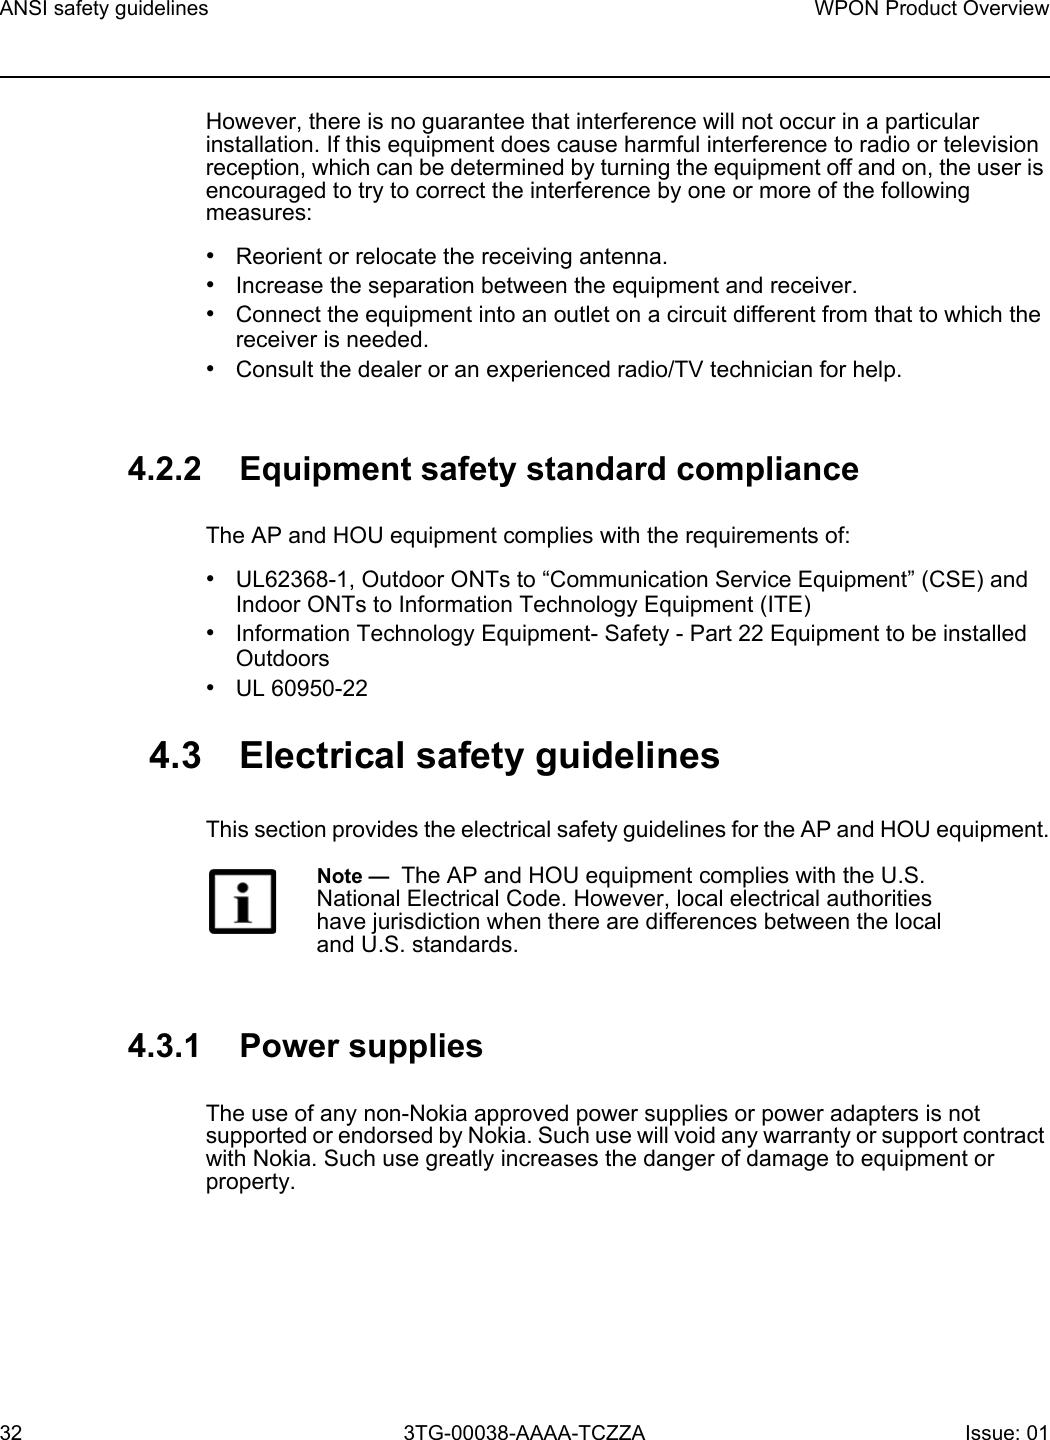 ANSI safety guidelines32WPON Product Overview3TG-00038-AAAA-TCZZA Issue: 01 However, there is no guarantee that interference will not occur in a particular installation. If this equipment does cause harmful interference to radio or television reception, which can be determined by turning the equipment off and on, the user is encouraged to try to correct the interference by one or more of the following measures:•Reorient or relocate the receiving antenna.•Increase the separation between the equipment and receiver.•Connect the equipment into an outlet on a circuit different from that to which the receiver is needed.•Consult the dealer or an experienced radio/TV technician for help.4.2.2 Equipment safety standard complianceThe AP and HOU equipment complies with the requirements of: •UL62368-1, Outdoor ONTs to “Communication Service Equipment” (CSE) and Indoor ONTs to Information Technology Equipment (ITE)•Information Technology Equipment- Safety - Part 22 Equipment to be installed Outdoors•UL 60950-224.3 Electrical safety guidelinesThis section provides the electrical safety guidelines for the AP and HOU equipment.4.3.1 Power suppliesThe use of any non-Nokia approved power supplies or power adapters is not supported or endorsed by Nokia. Such use will void any warranty or support contract with Nokia. Such use greatly increases the danger of damage to equipment or property.Note —  The AP and HOU equipment complies with the U.S. National Electrical Code. However, local electrical authorities have jurisdiction when there are differences between the local and U.S. standards.